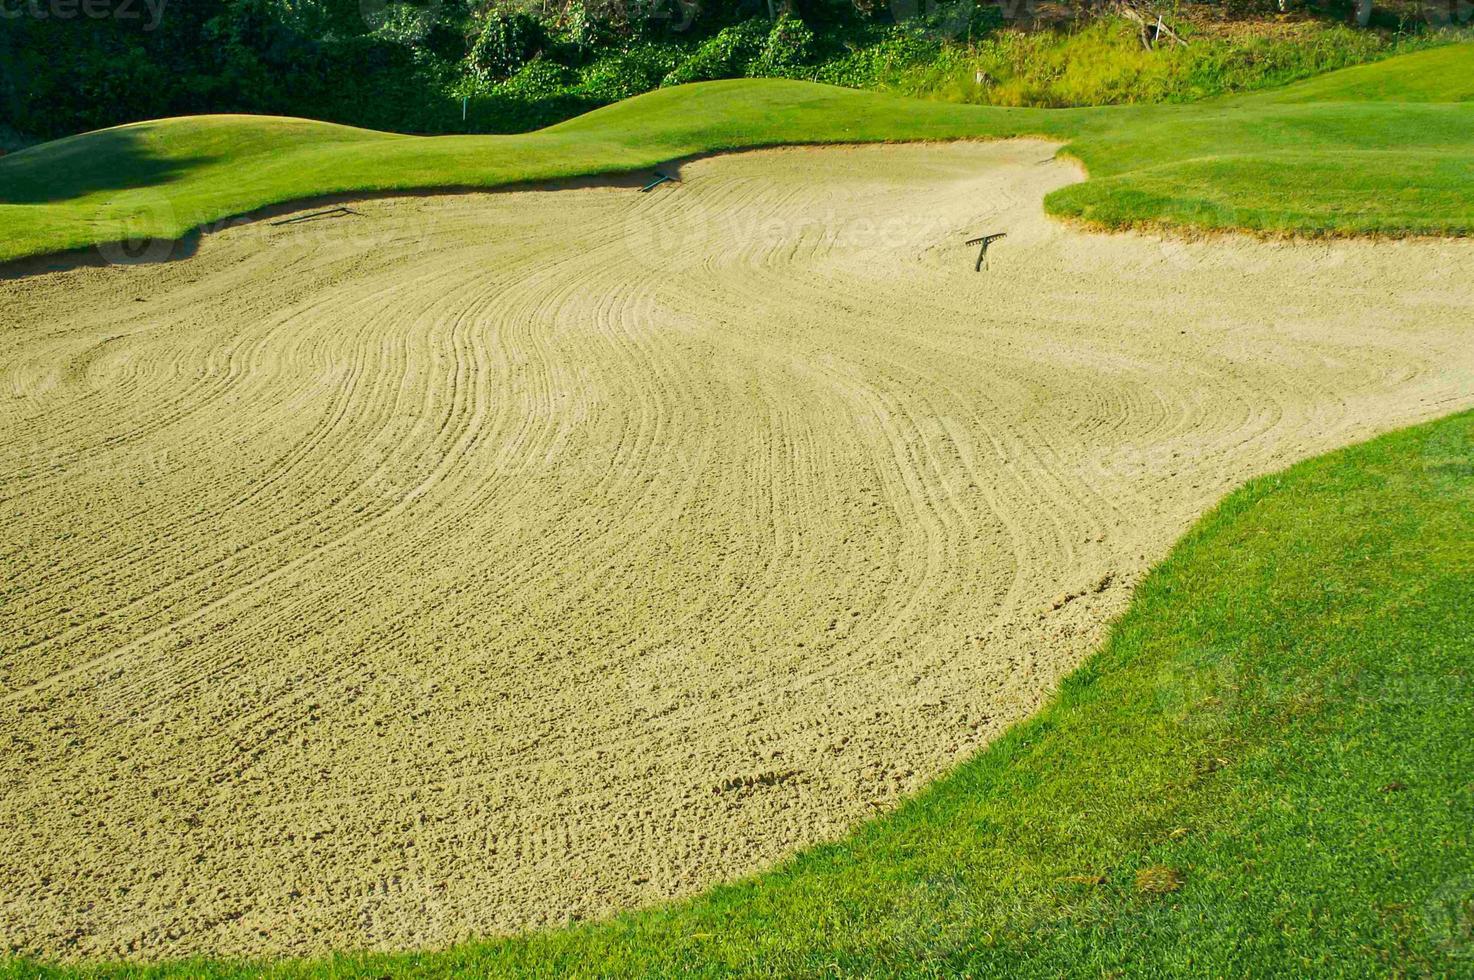 Abstract of Golf Course and Sand Bunker. photo